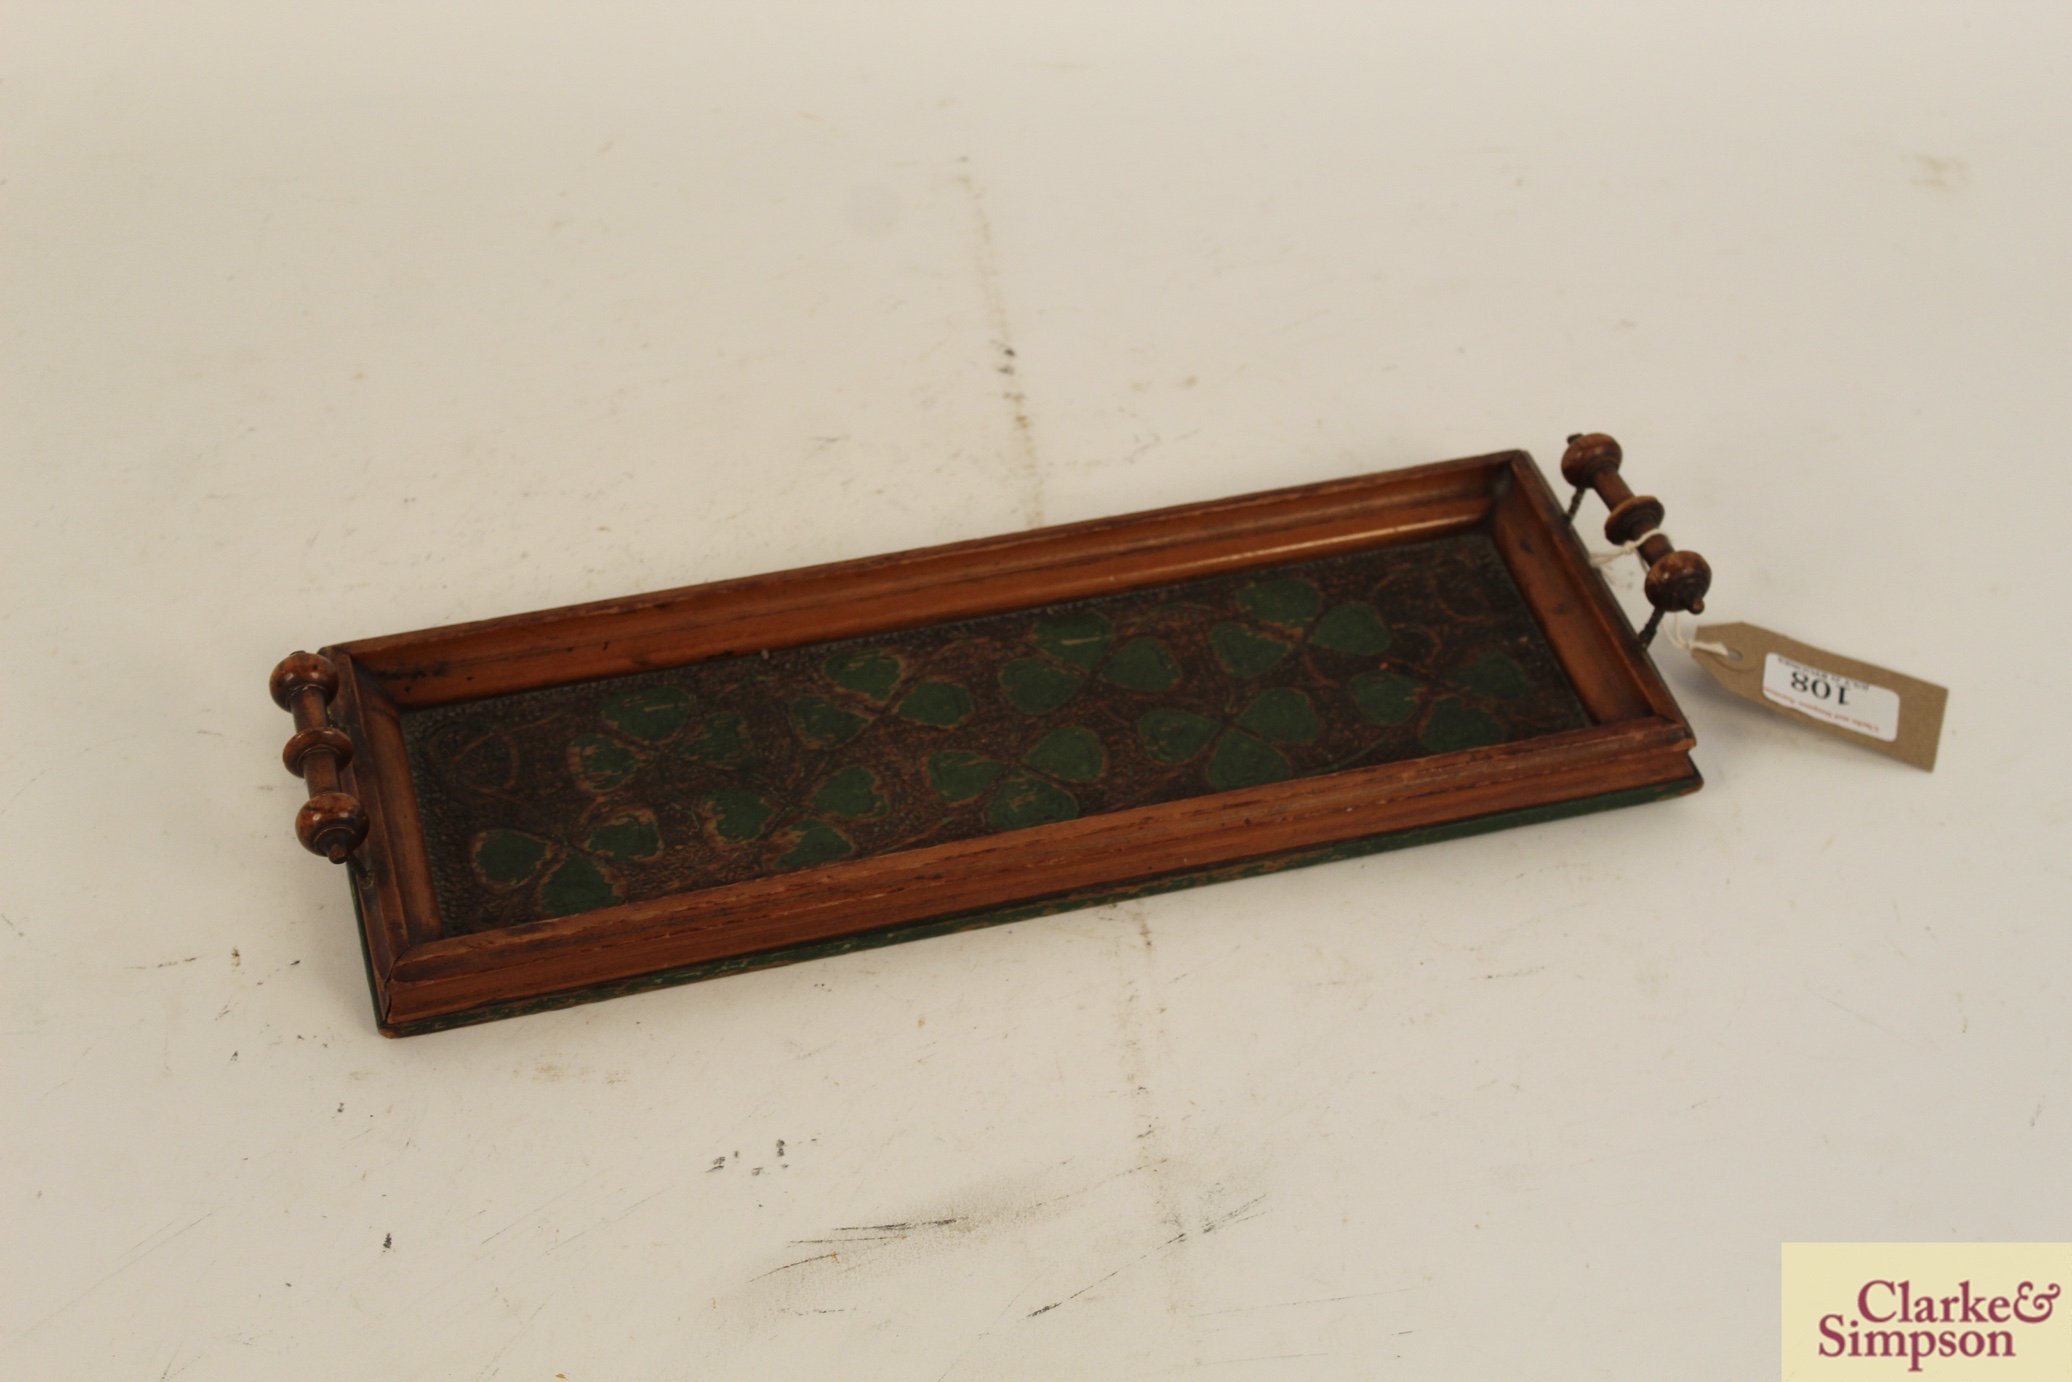 A small wooden two handled tray with clover leaf d